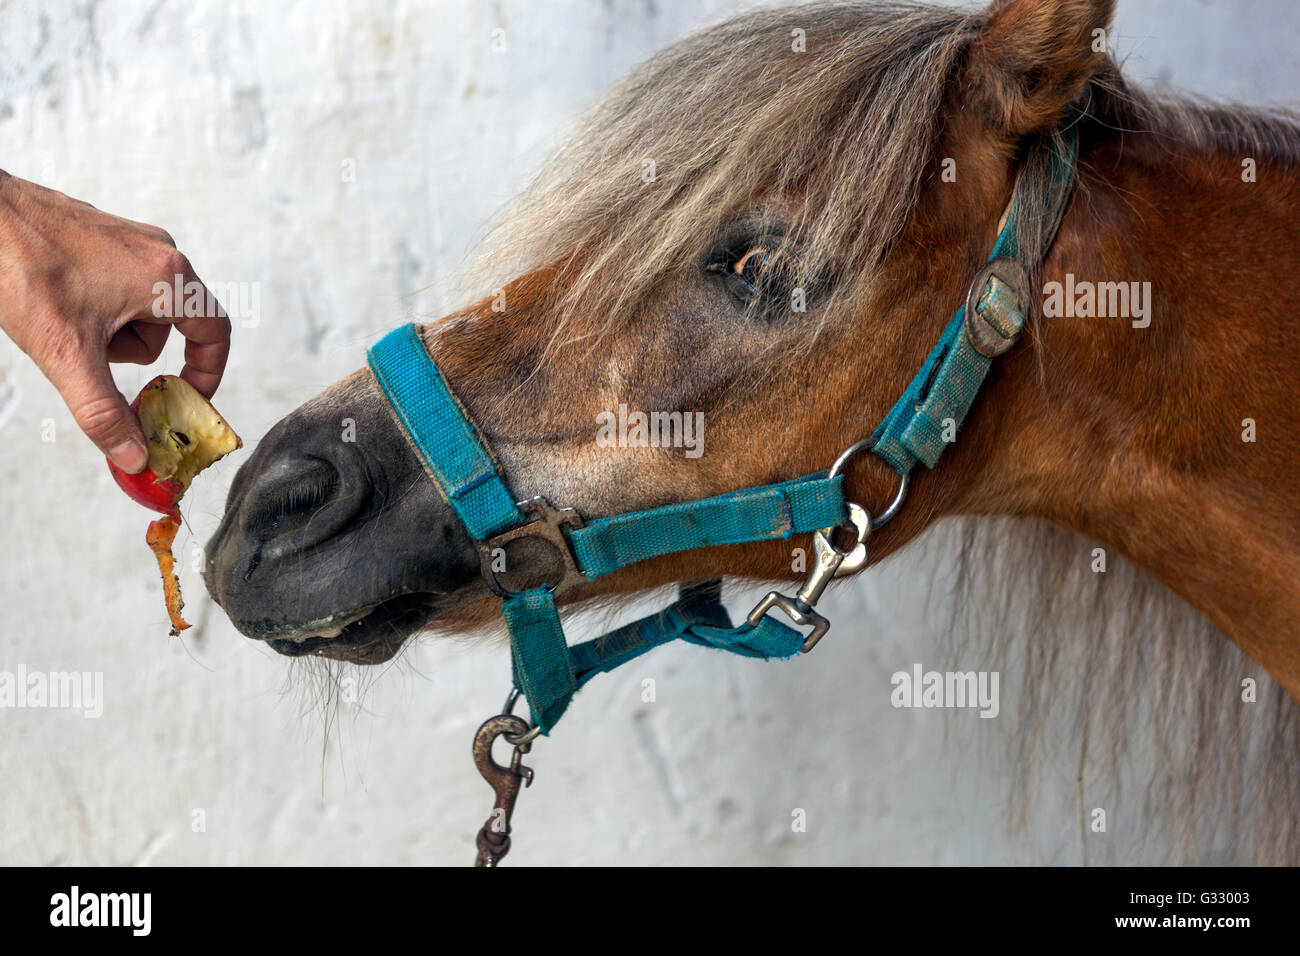 Hand with an apple for a pony, woman feeding horse, horse bridle Stock Photo